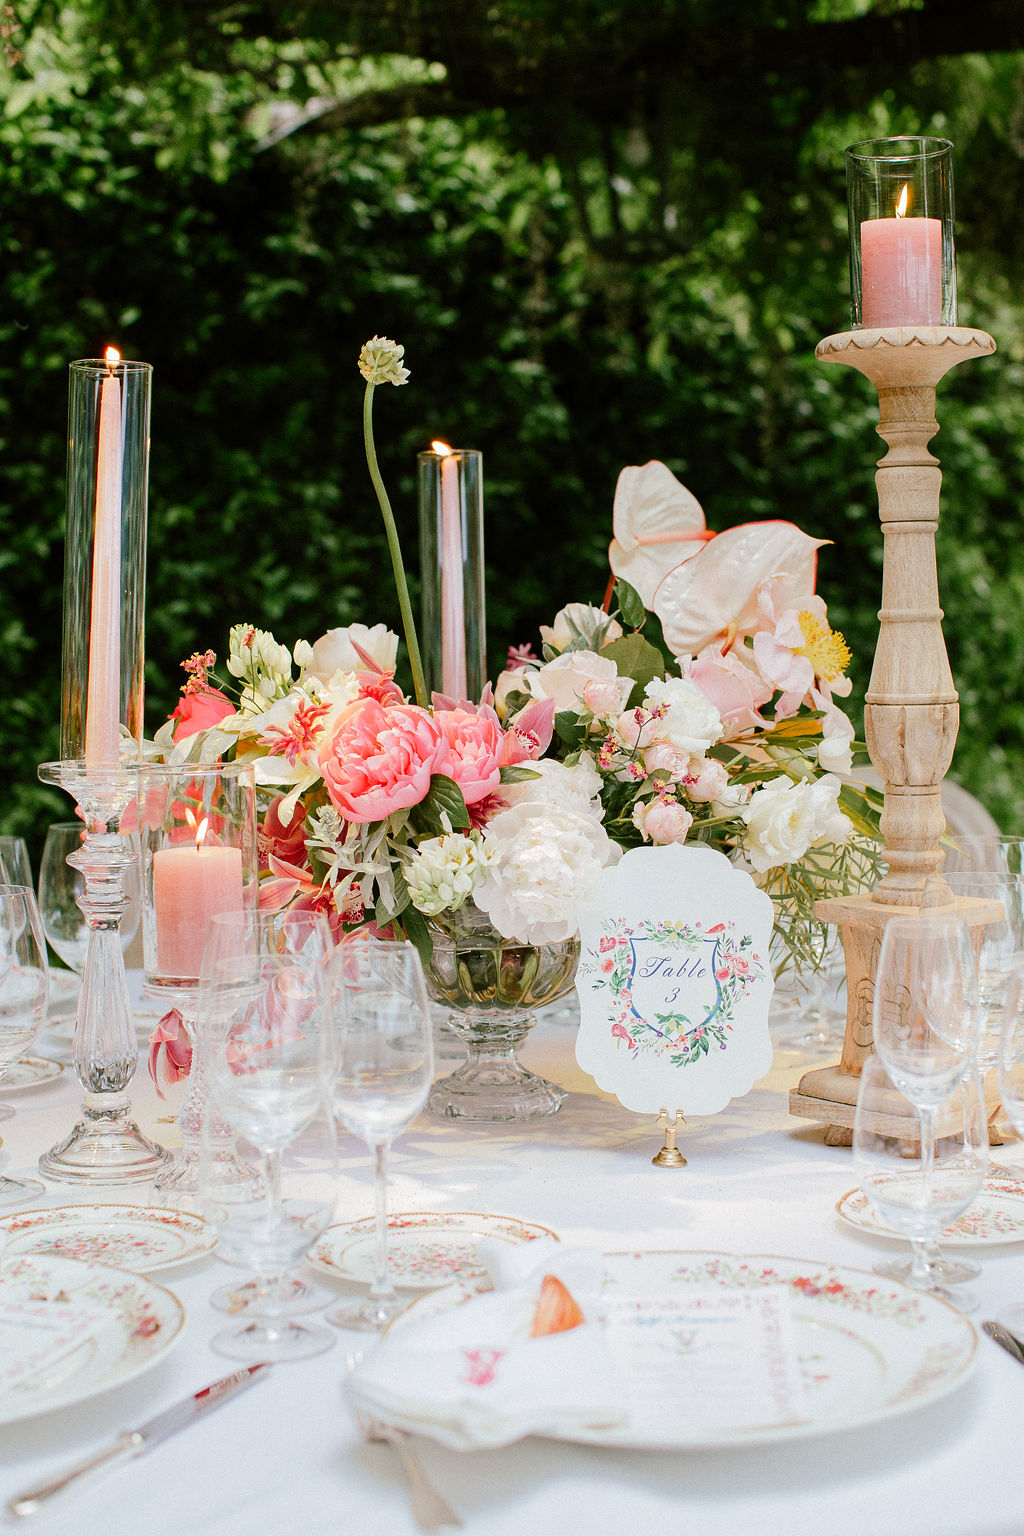 Blooming centerpiece for round table with pink candles